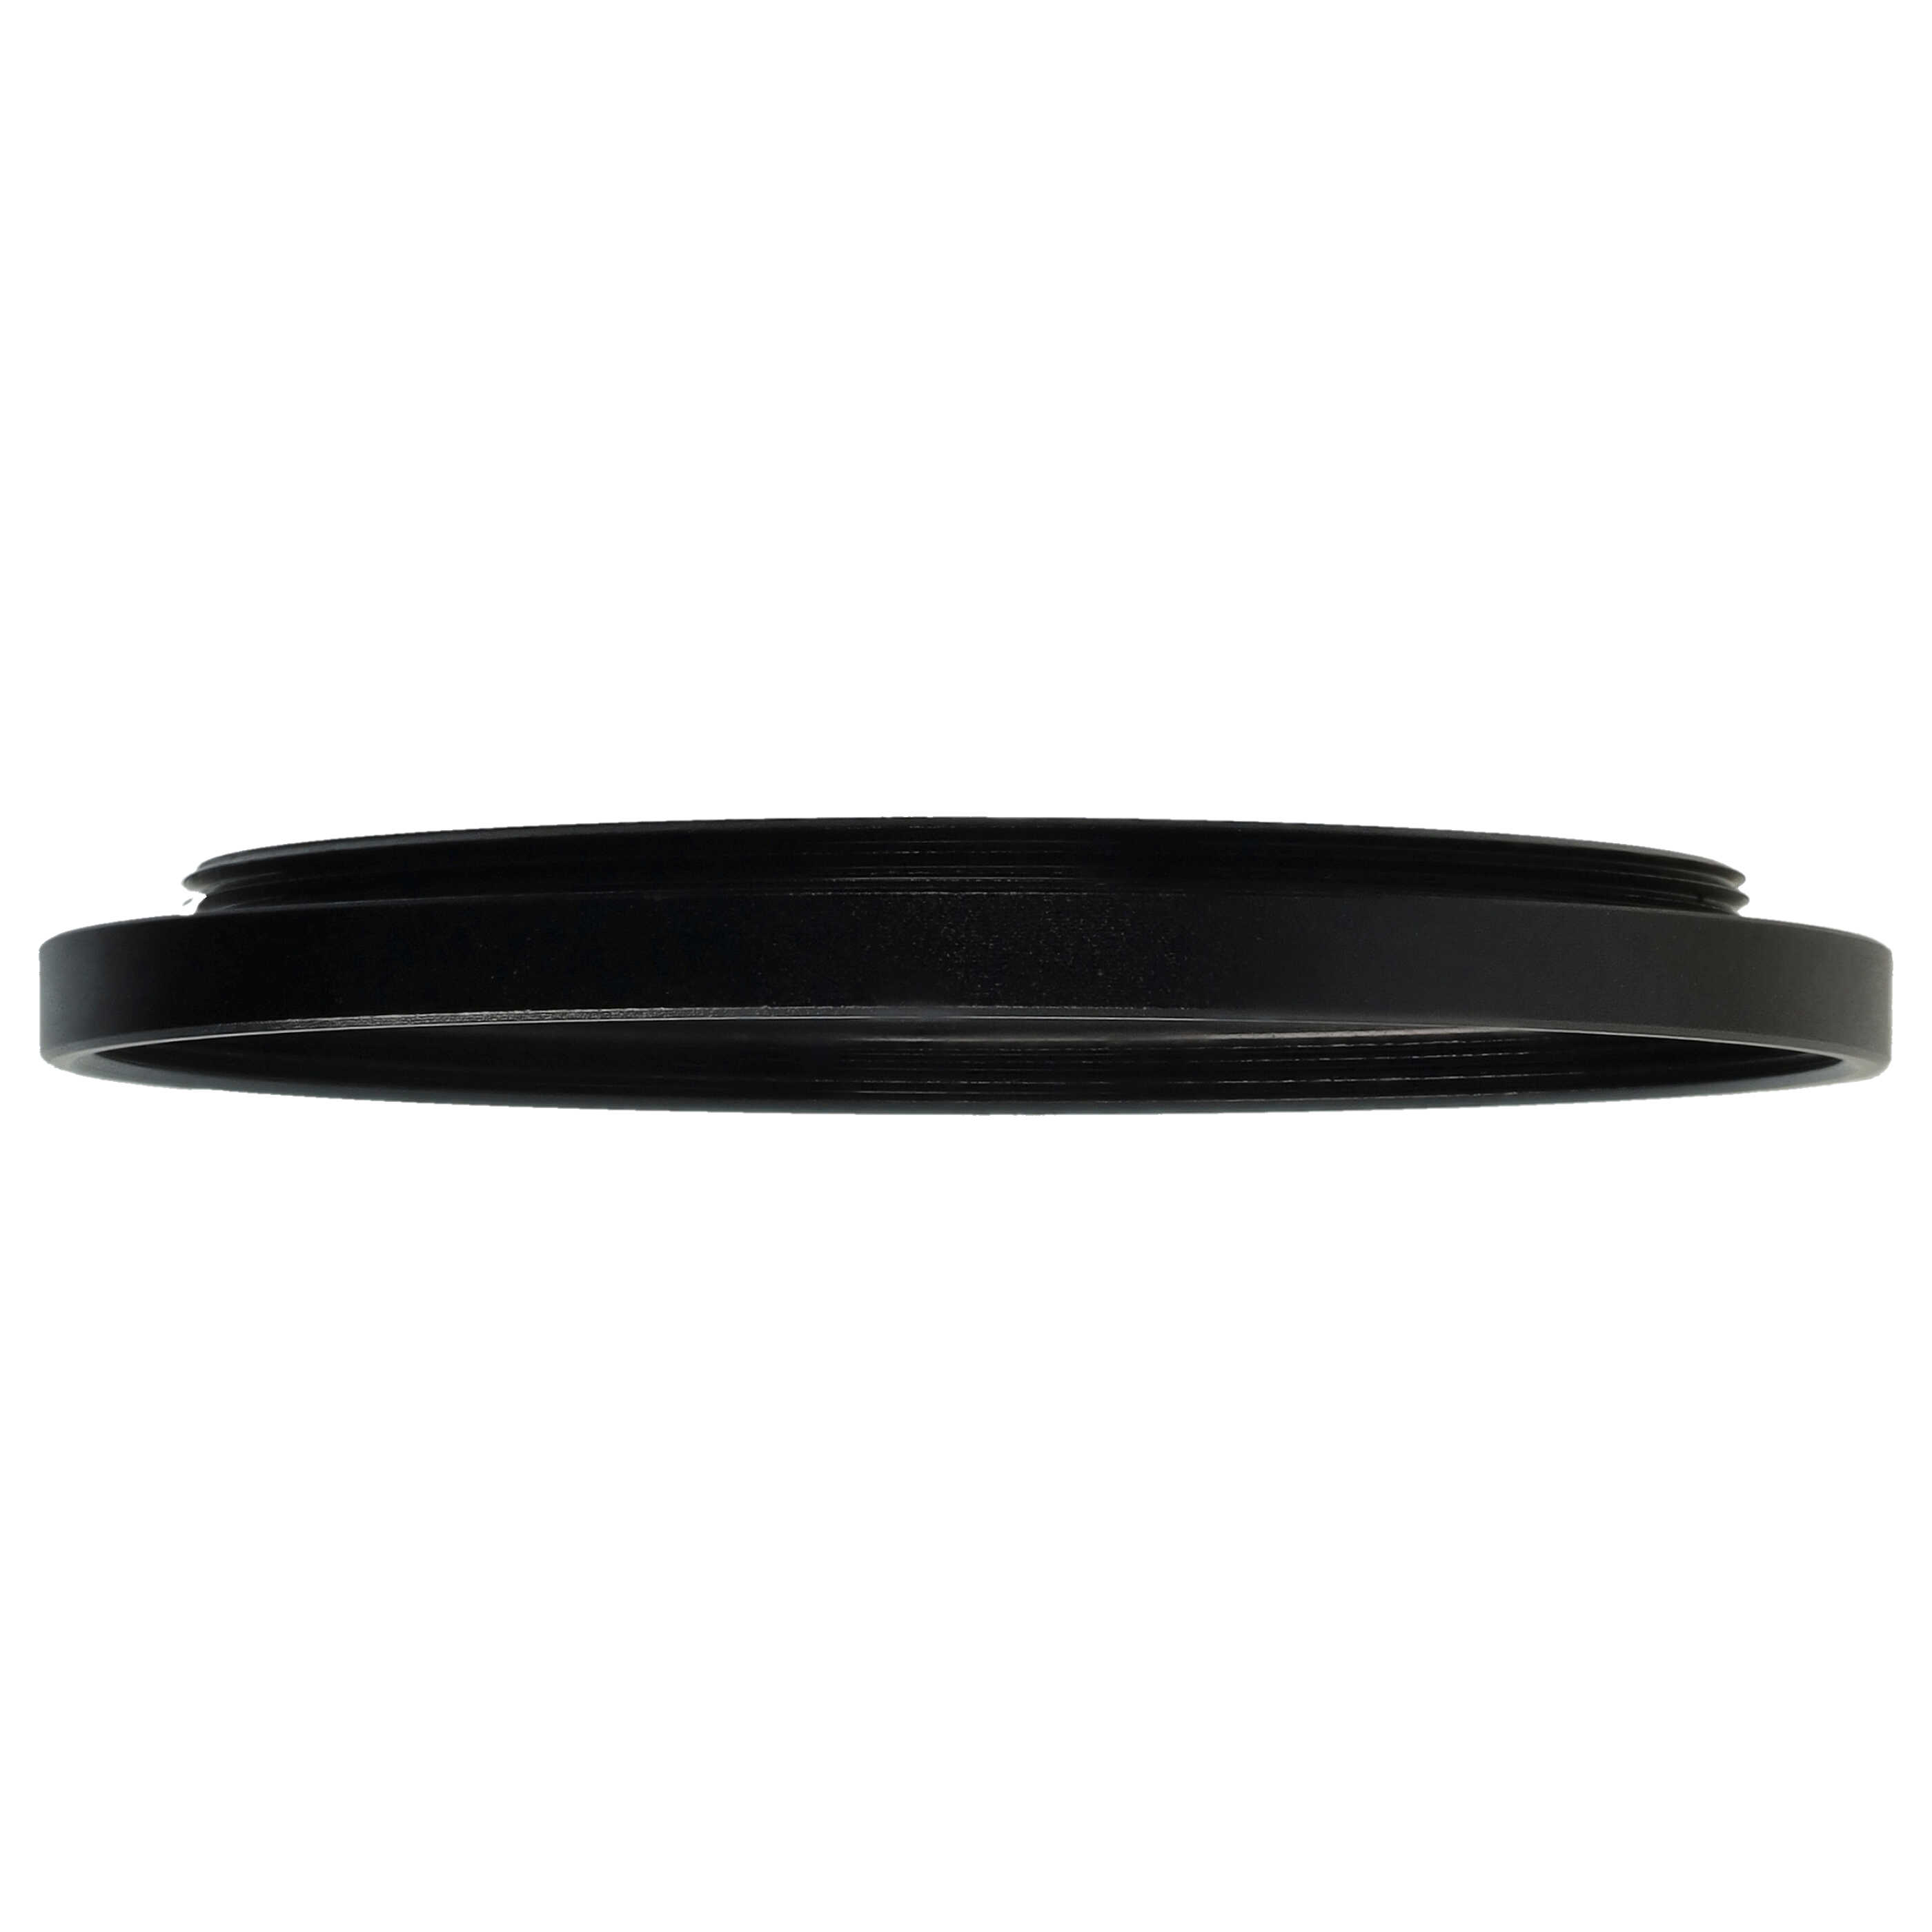 Step-Up Ring Adapter of 49 mm to 55 mmfor various Camera Lens - Filter Adapter